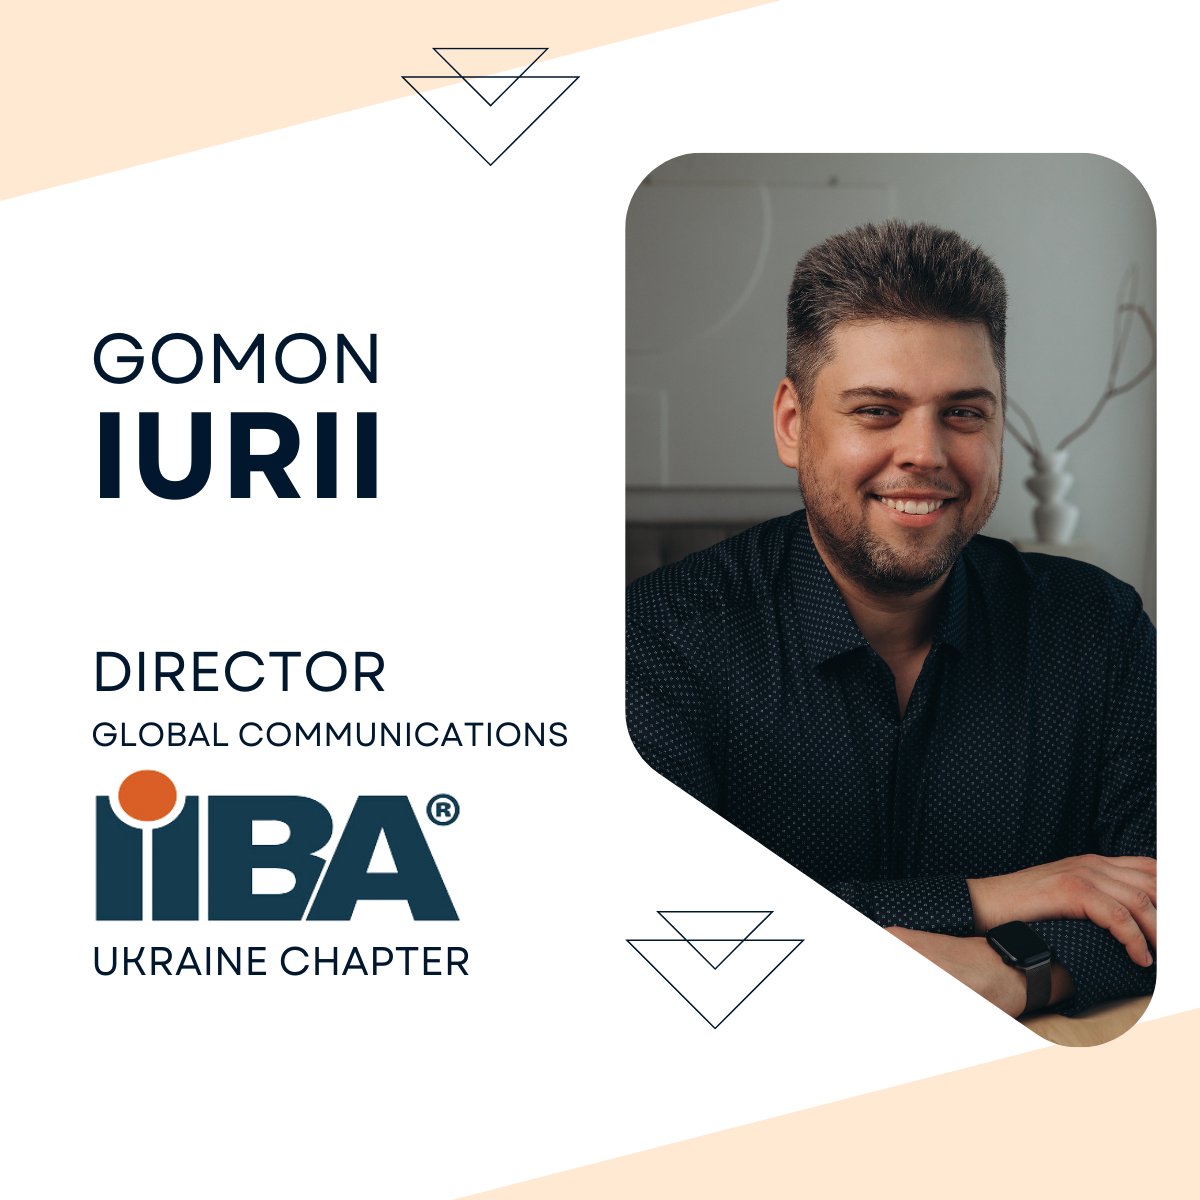 Great news, everyone ✌️ As of today, I joined the IIBA Ukraine Chapter as the Director of Global Communications! Looking forward to working with other chapters on many cool projects! 😎
#businessanalysis #businessanalyst #iiba